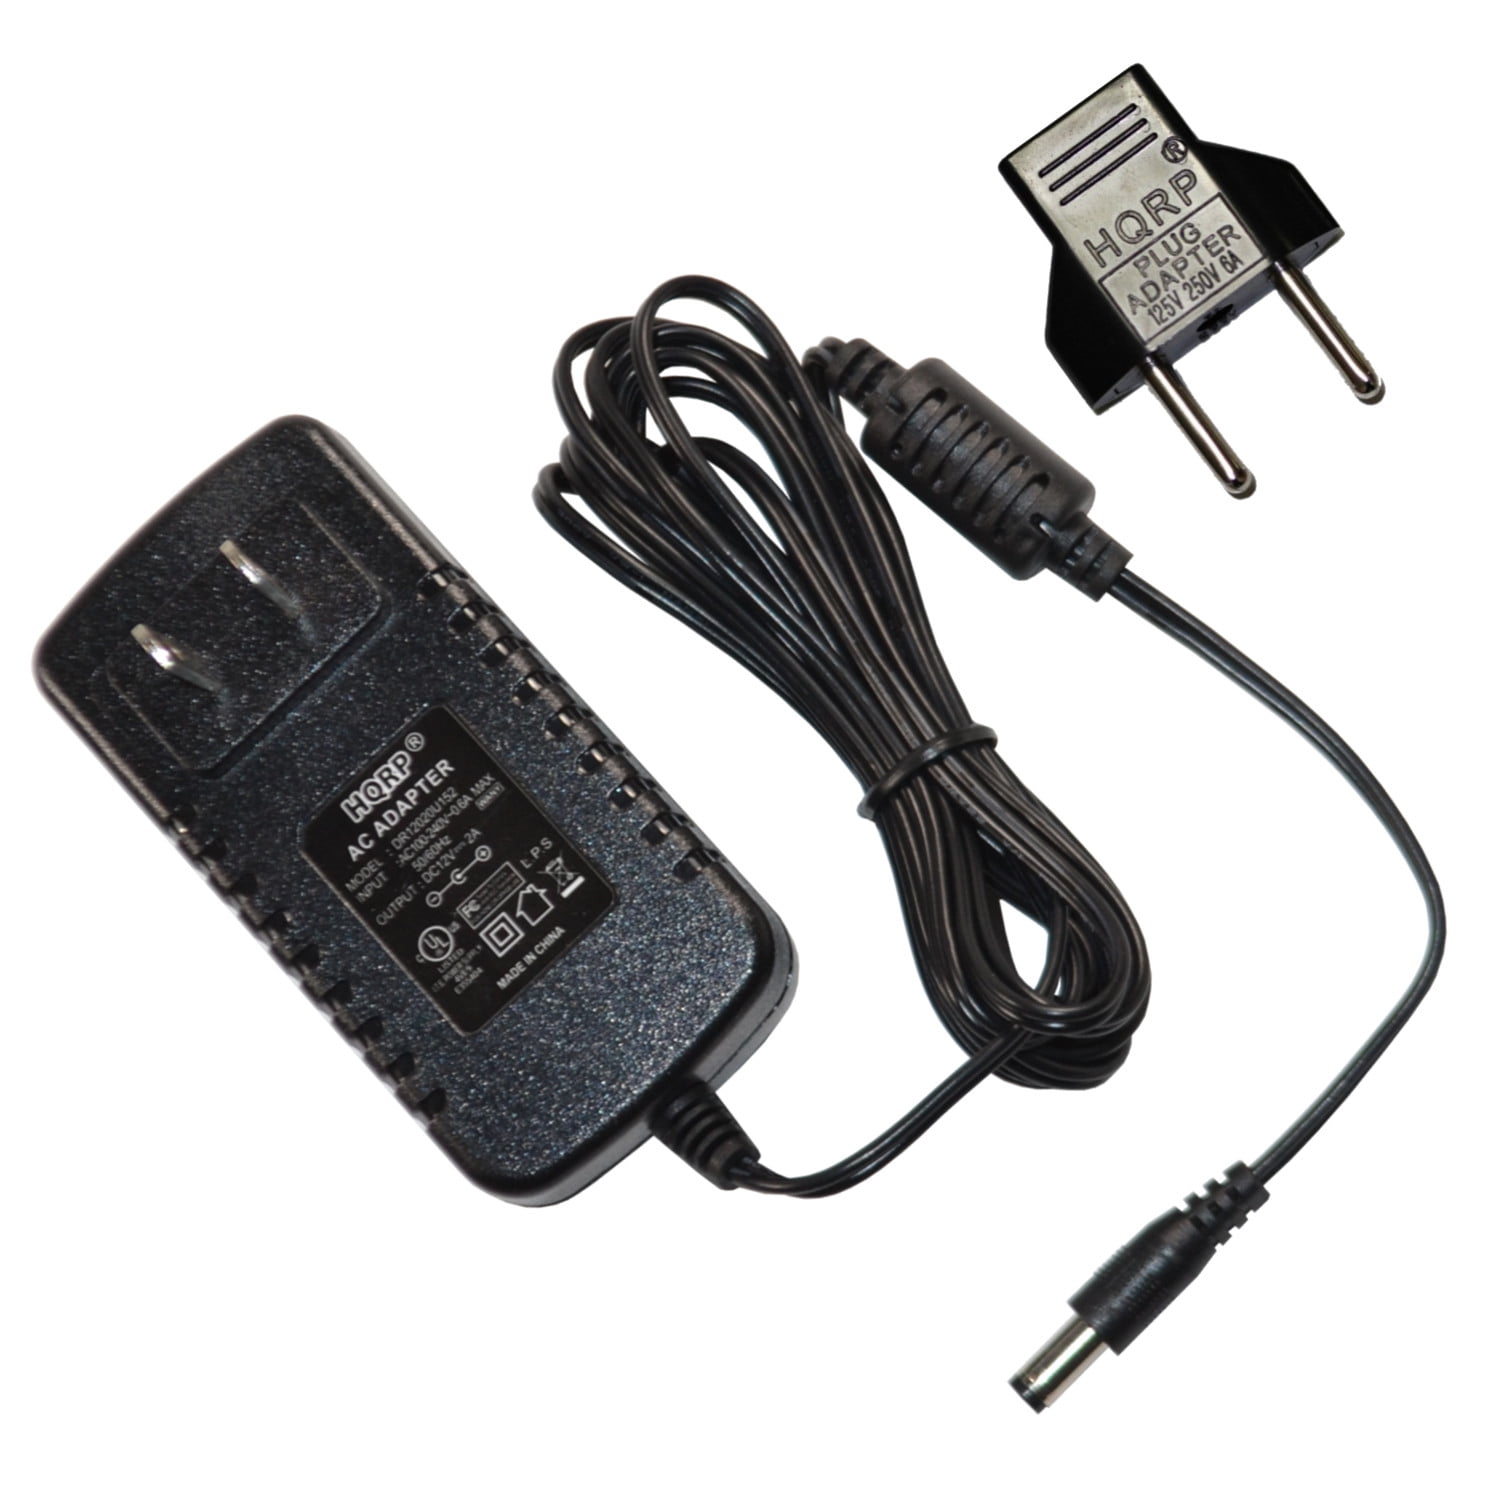 Replacement Power Supply for 12v DC Yamaha YPG-235 Keyboard Cable 2A Sj 